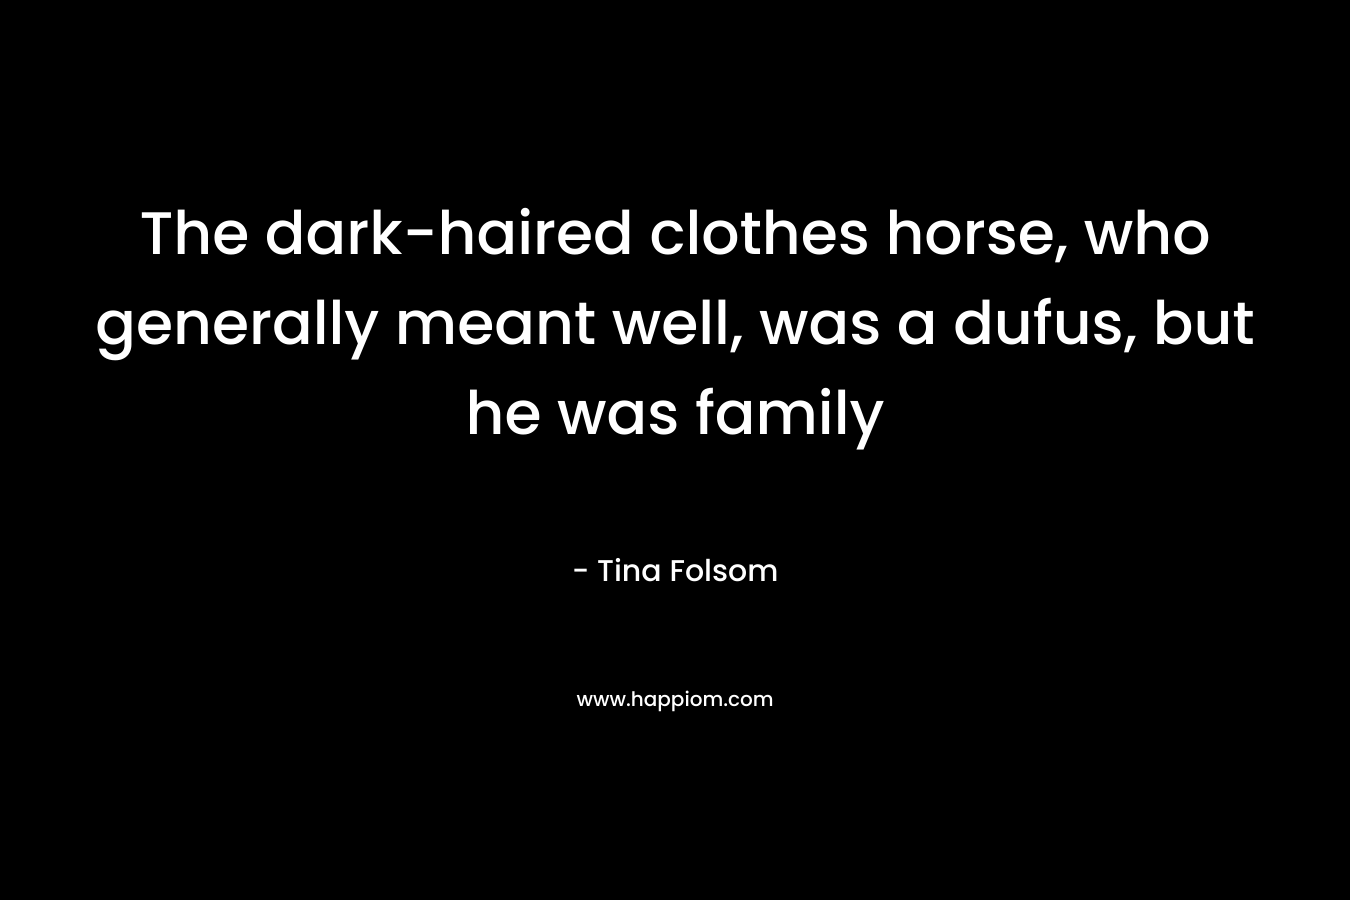 The dark-haired clothes horse, who generally meant well, was a dufus, but he was family – Tina Folsom